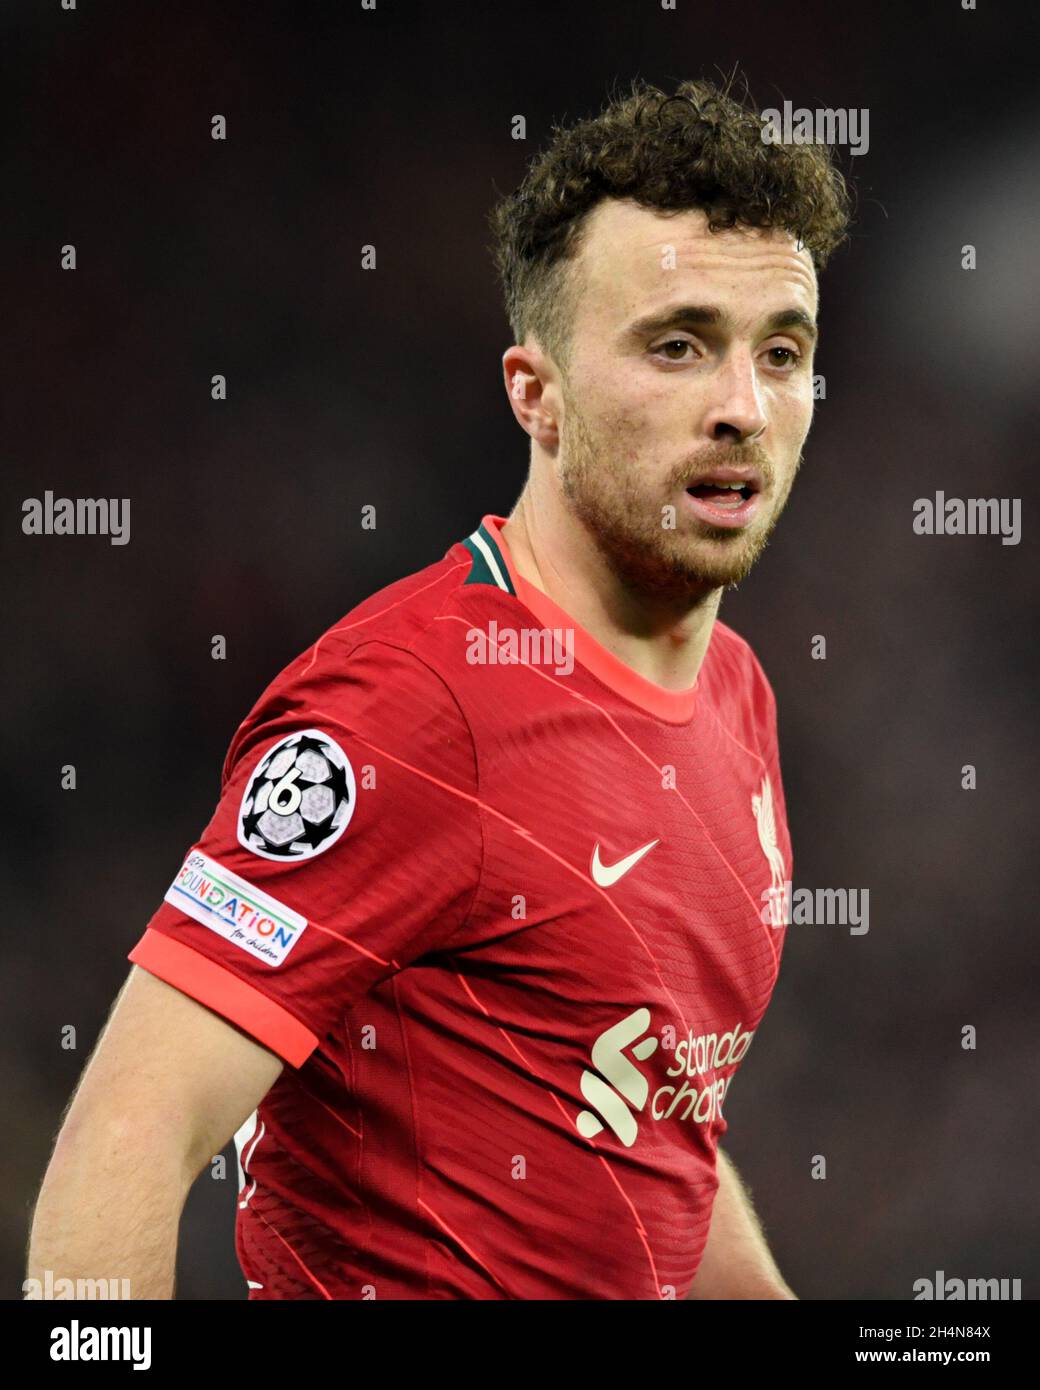 Diogo Jota 20 of Liverpool in action during the game Stock Photo